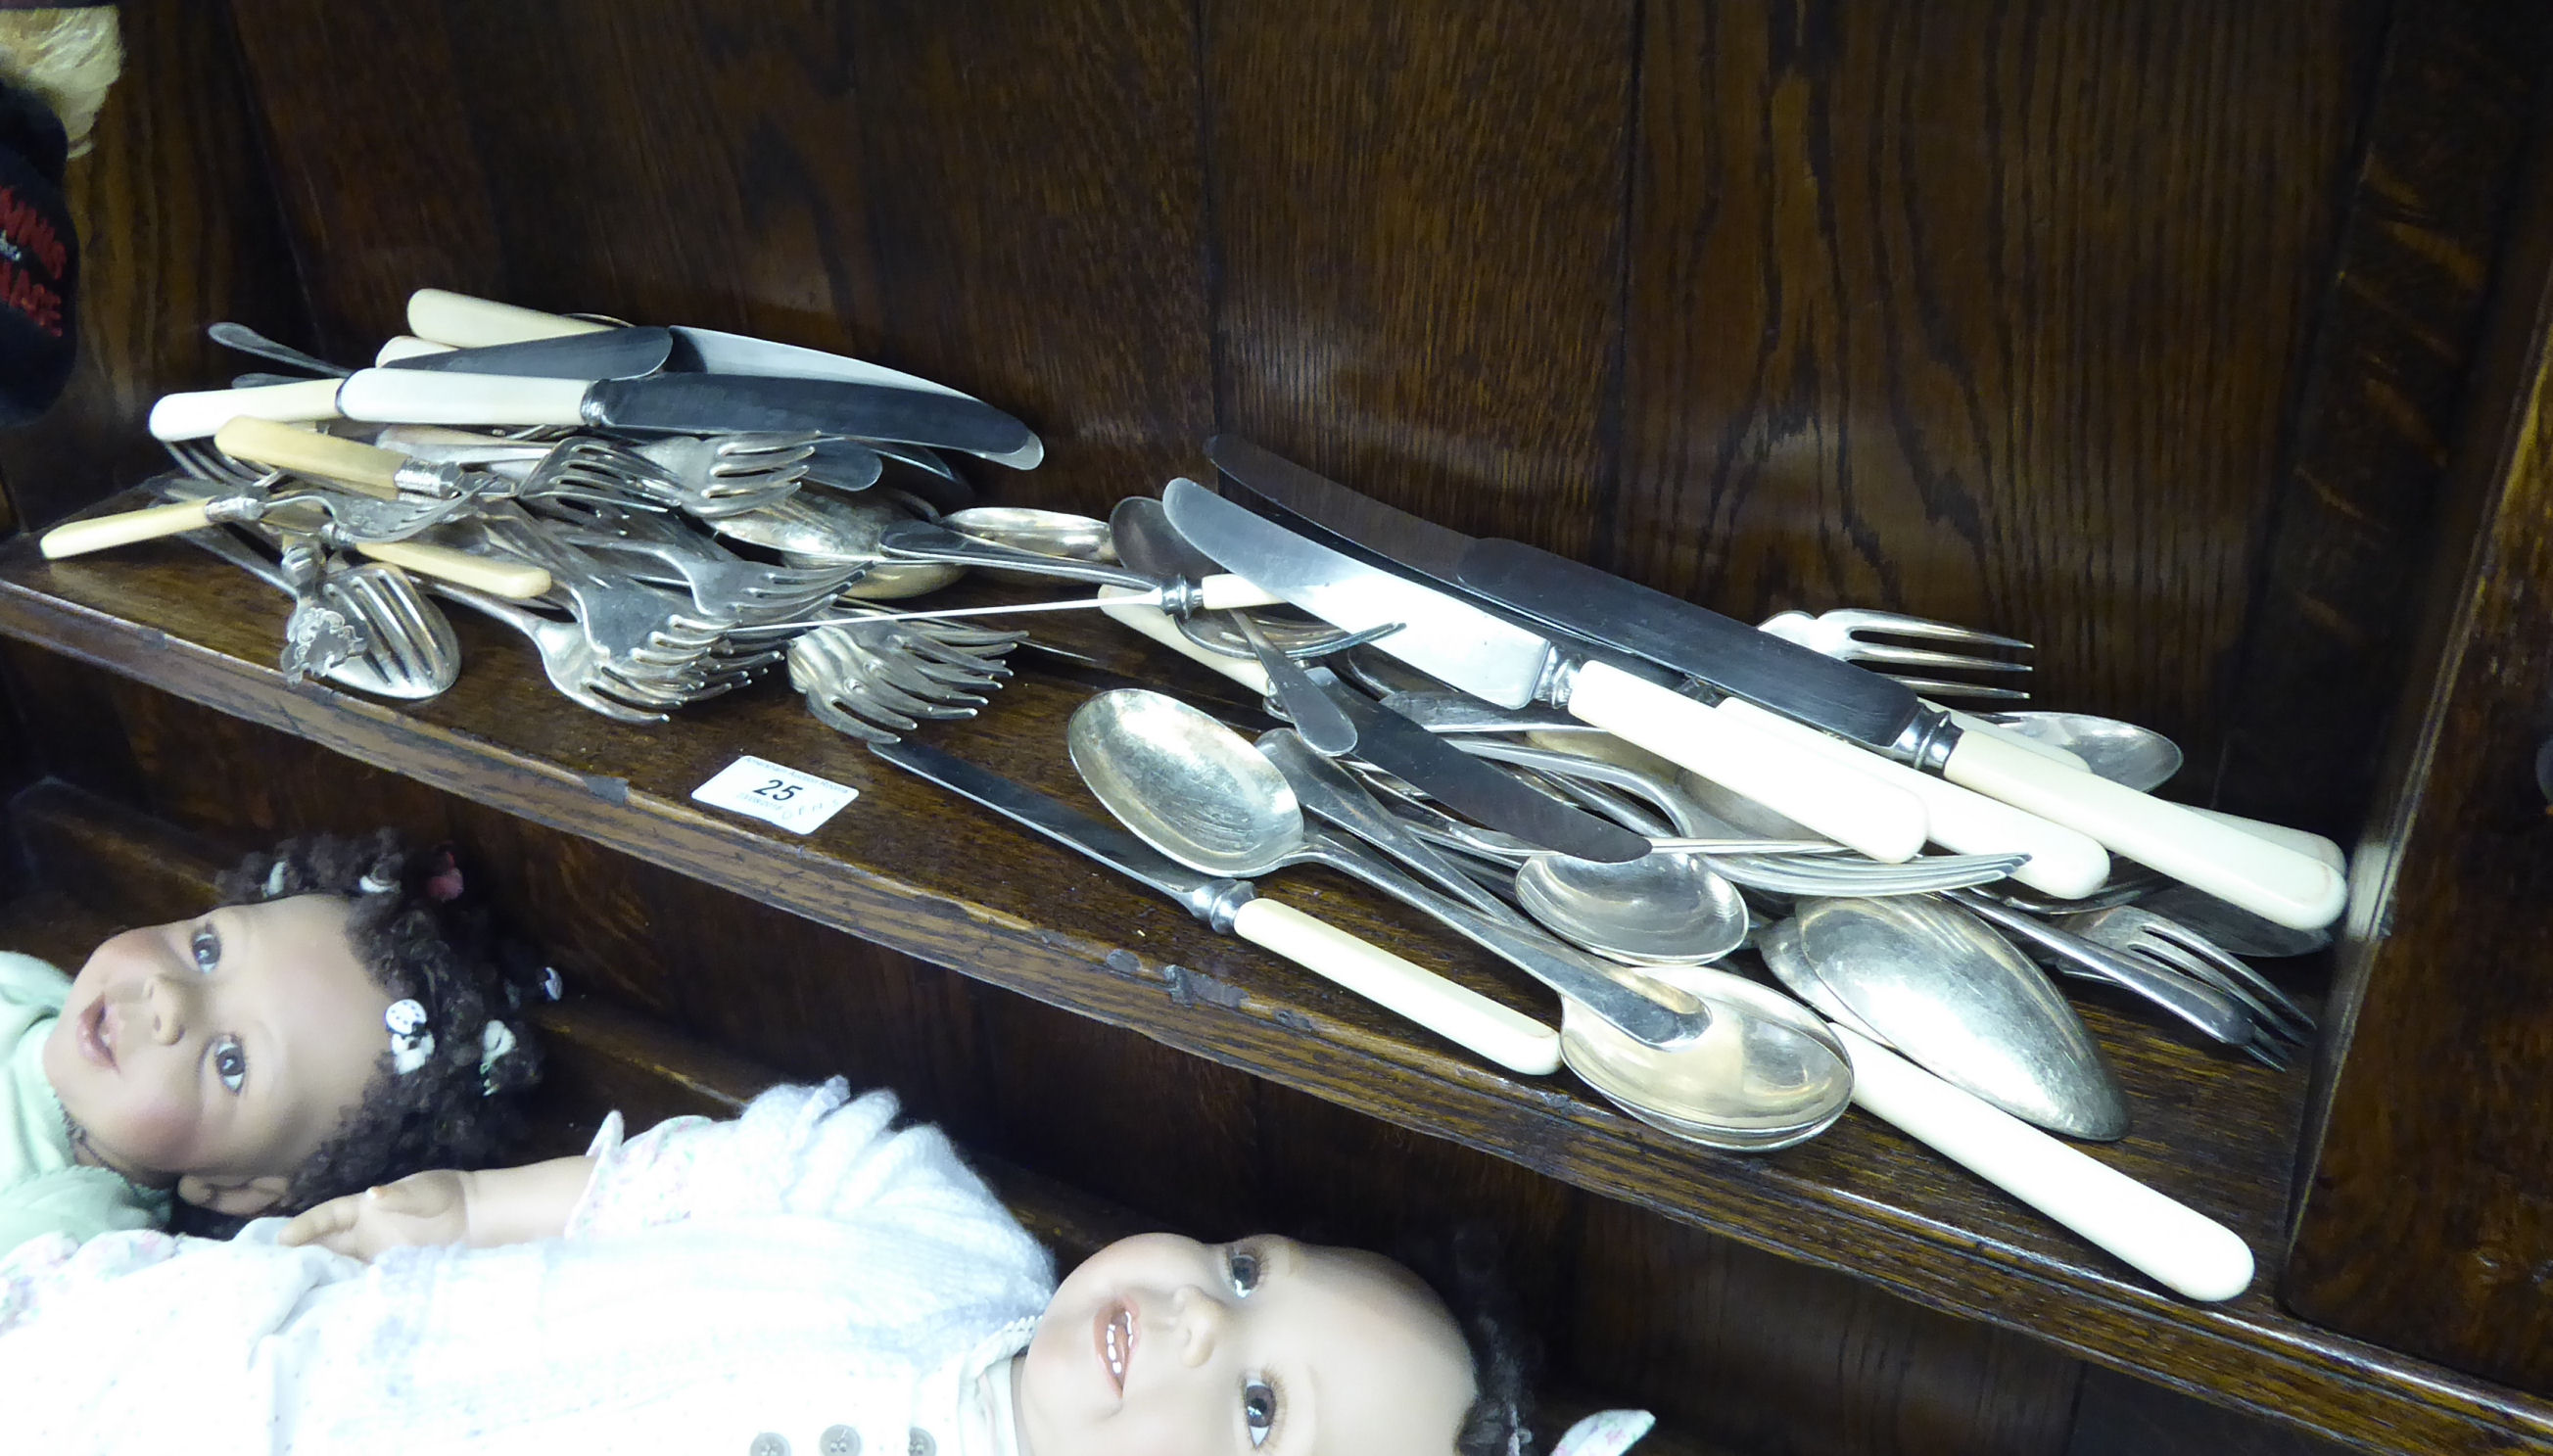 EPNS and stainless steel cutlery and flatware: to include Old English pattern RSM